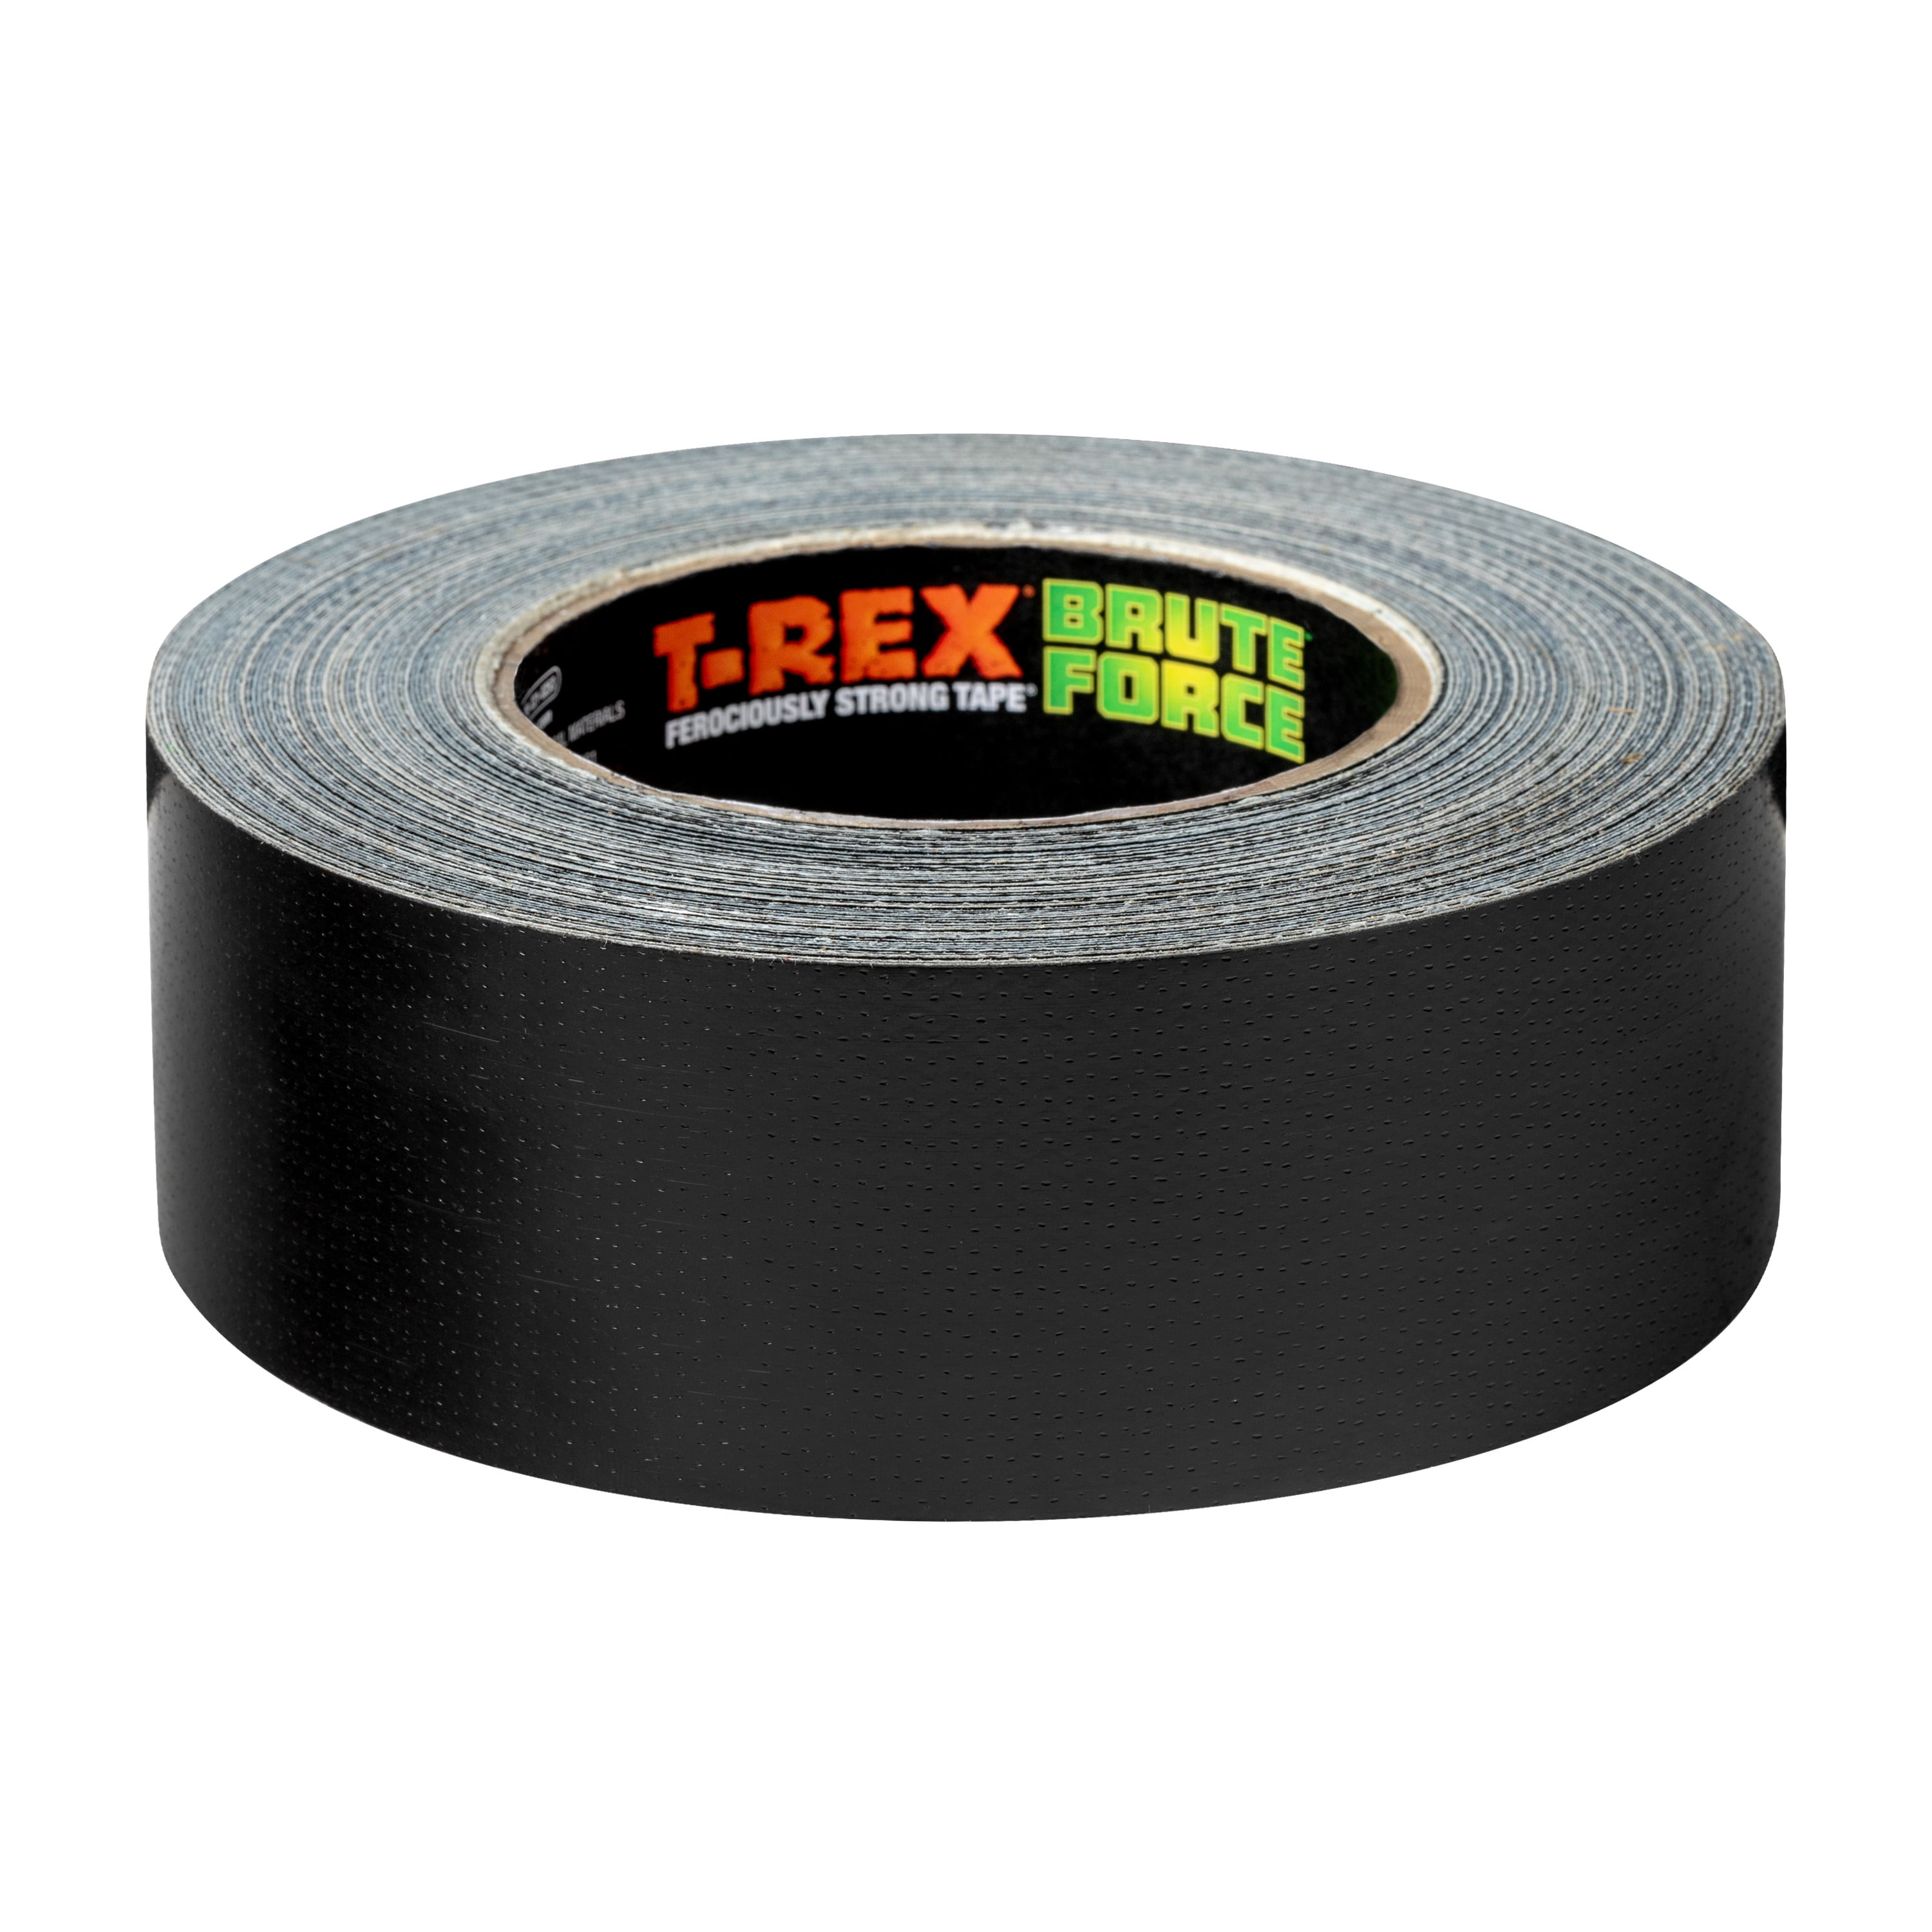 Autrends Black Duct Tape, 3 inches x 10 Yards(33FT) - Super Strong